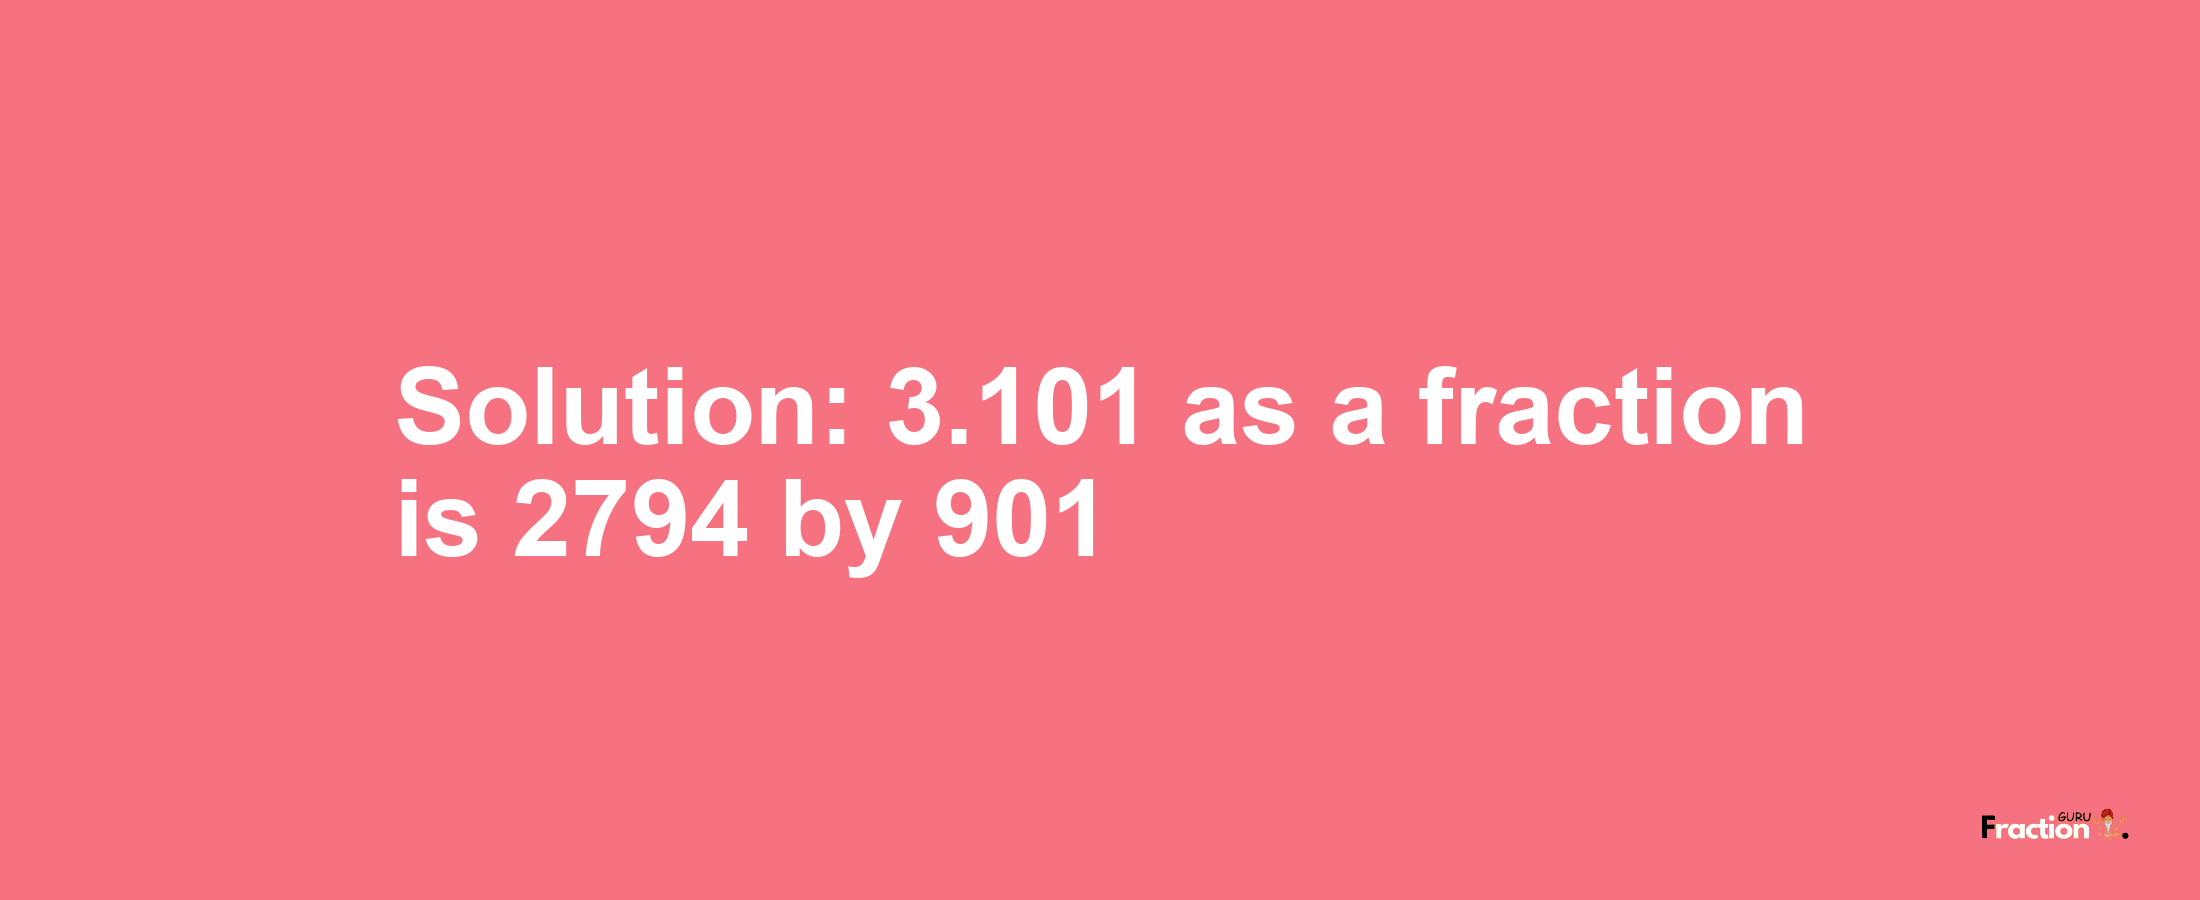 Solution:3.101 as a fraction is 2794/901